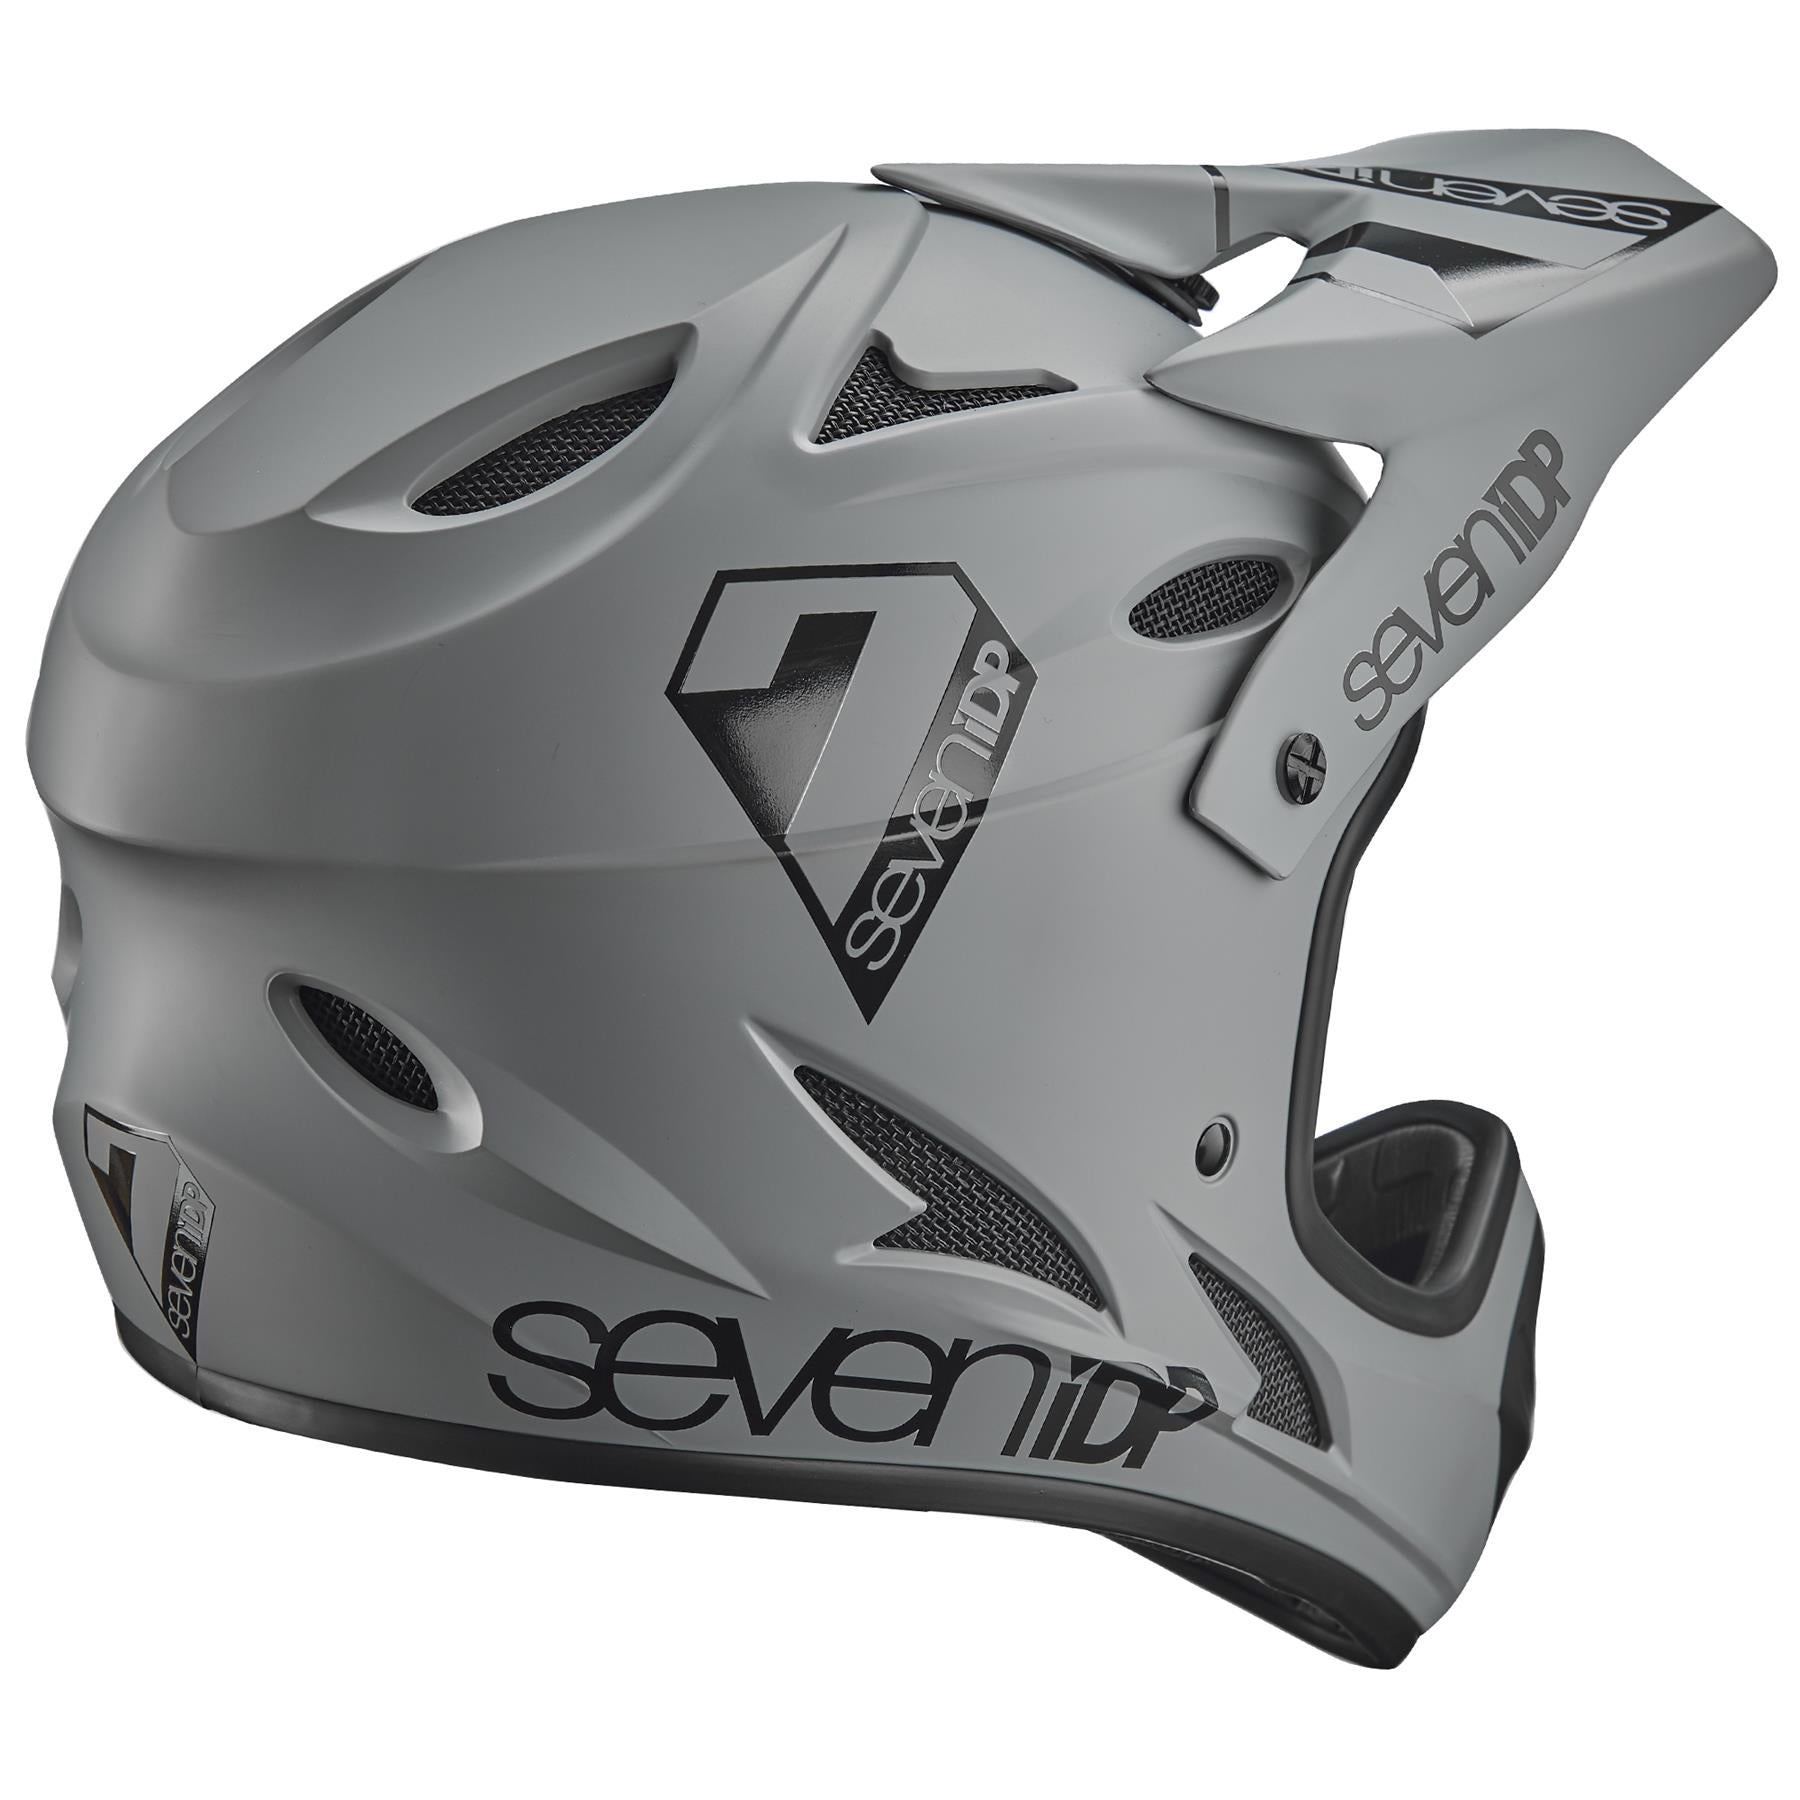 Seven iDP M1 Youth Race Helm - Grey